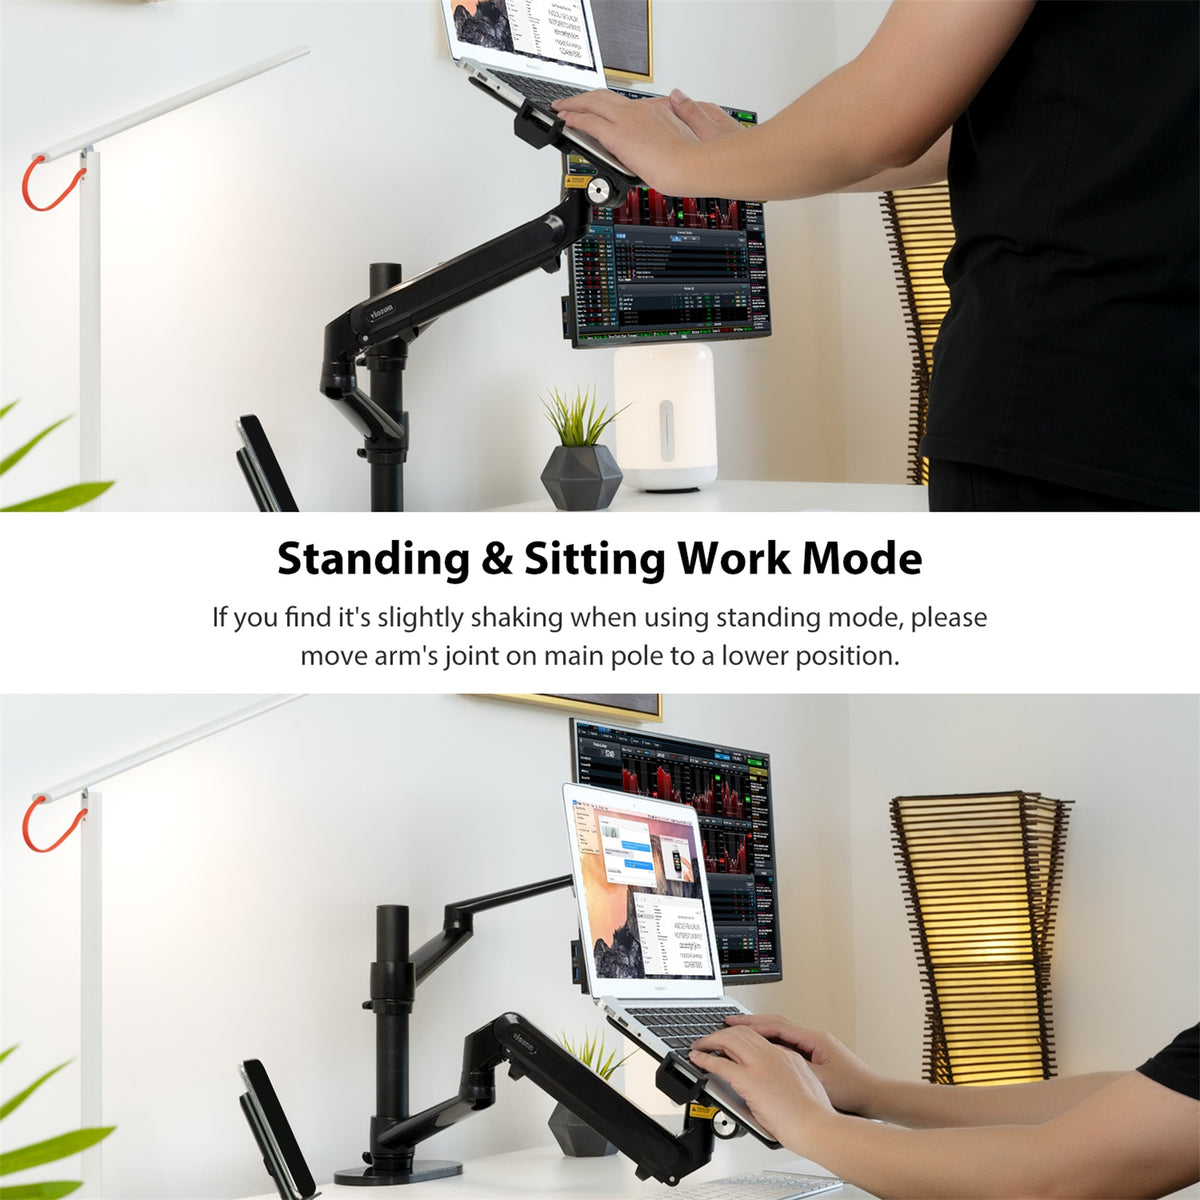 2-in-1 Monitor&amp;Laptop Mount with Gas Spring Arm(OL-3L Pro)